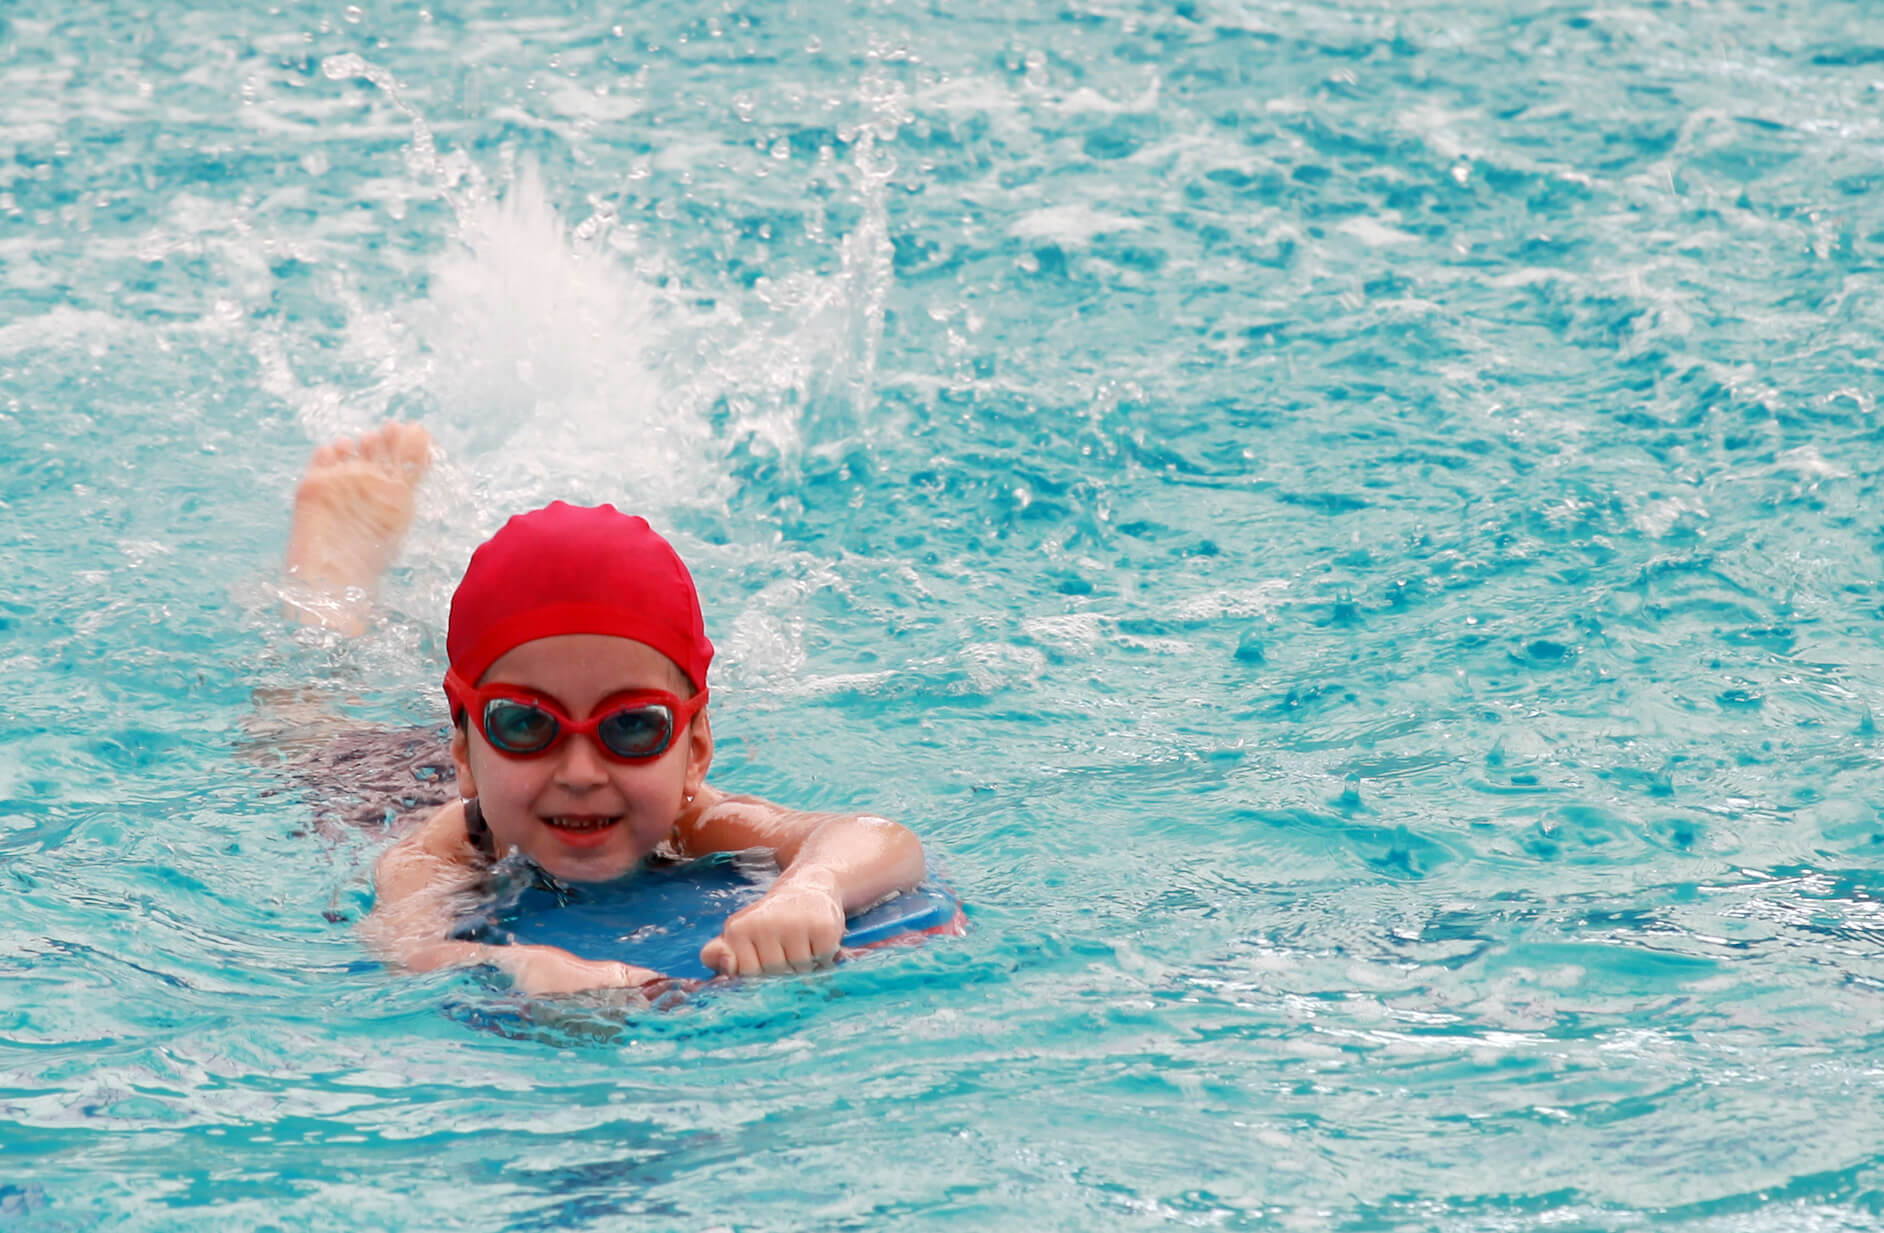 A young child swimming in a pool.